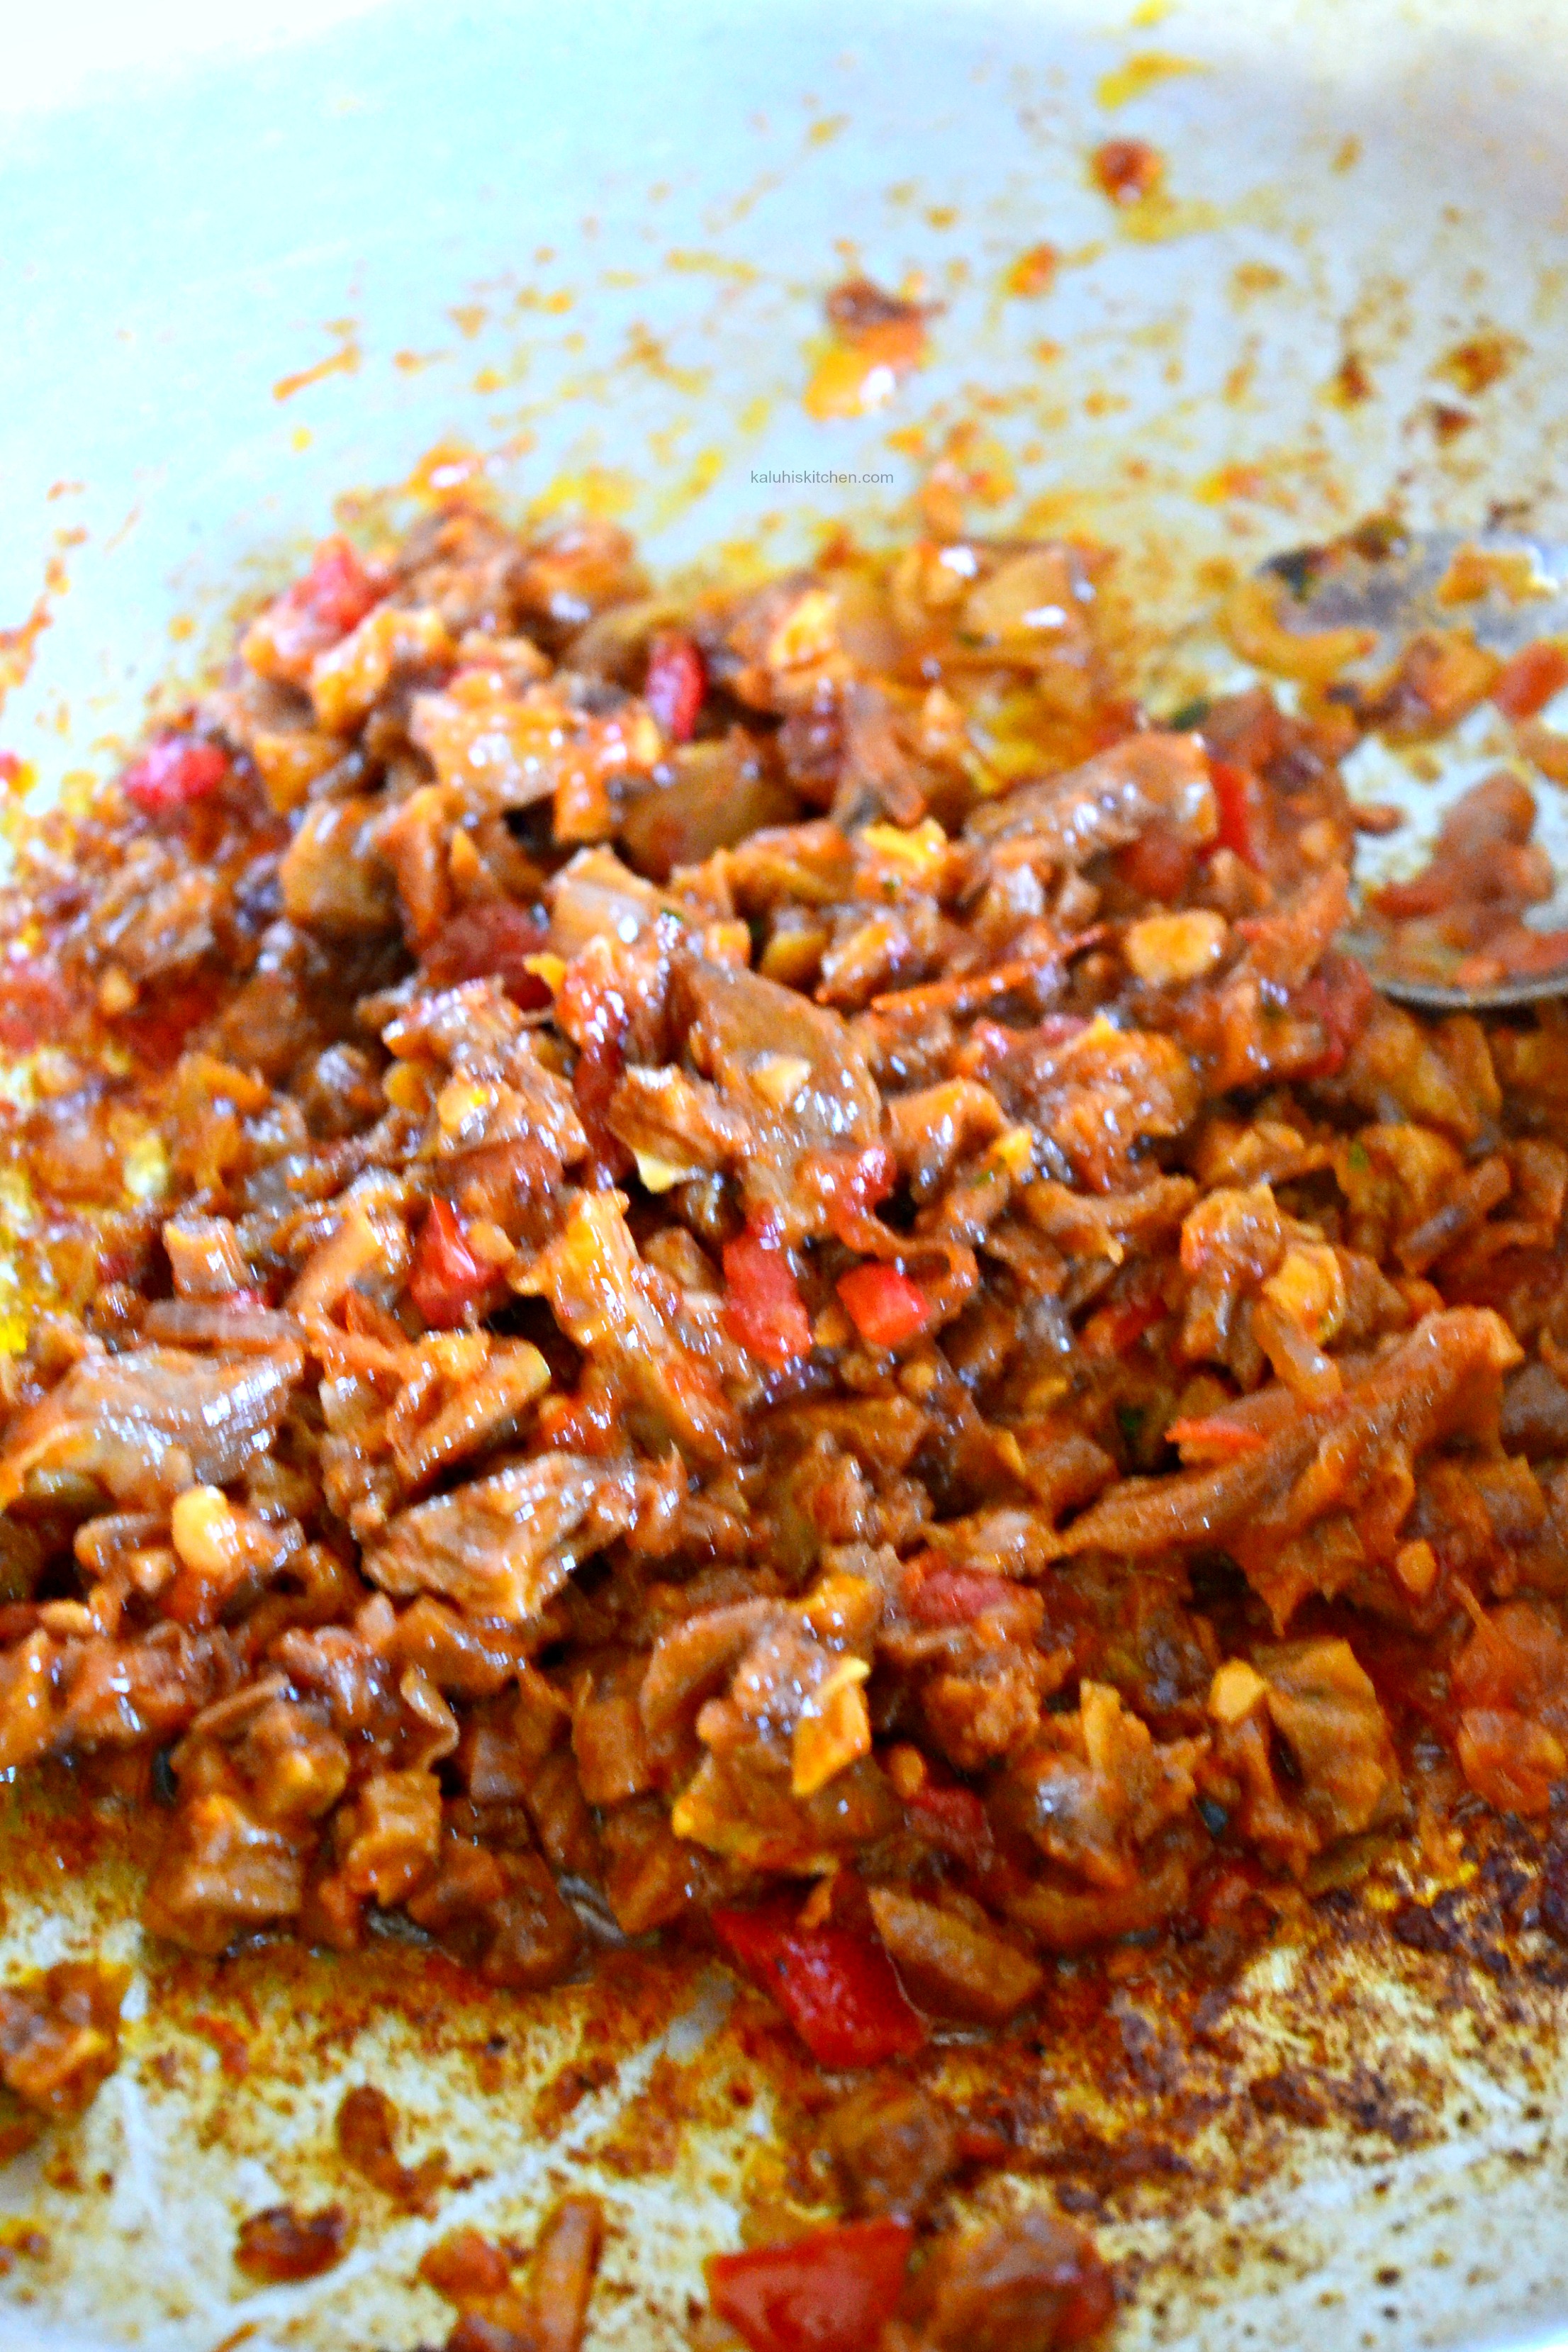 cook-the-meat-with-dates-cayenne-pepper-onions-garlic-and-tomatoes-for-it-to-have-a-fuller-more-bodied-flavor-profile_kaluhiskitchen-com